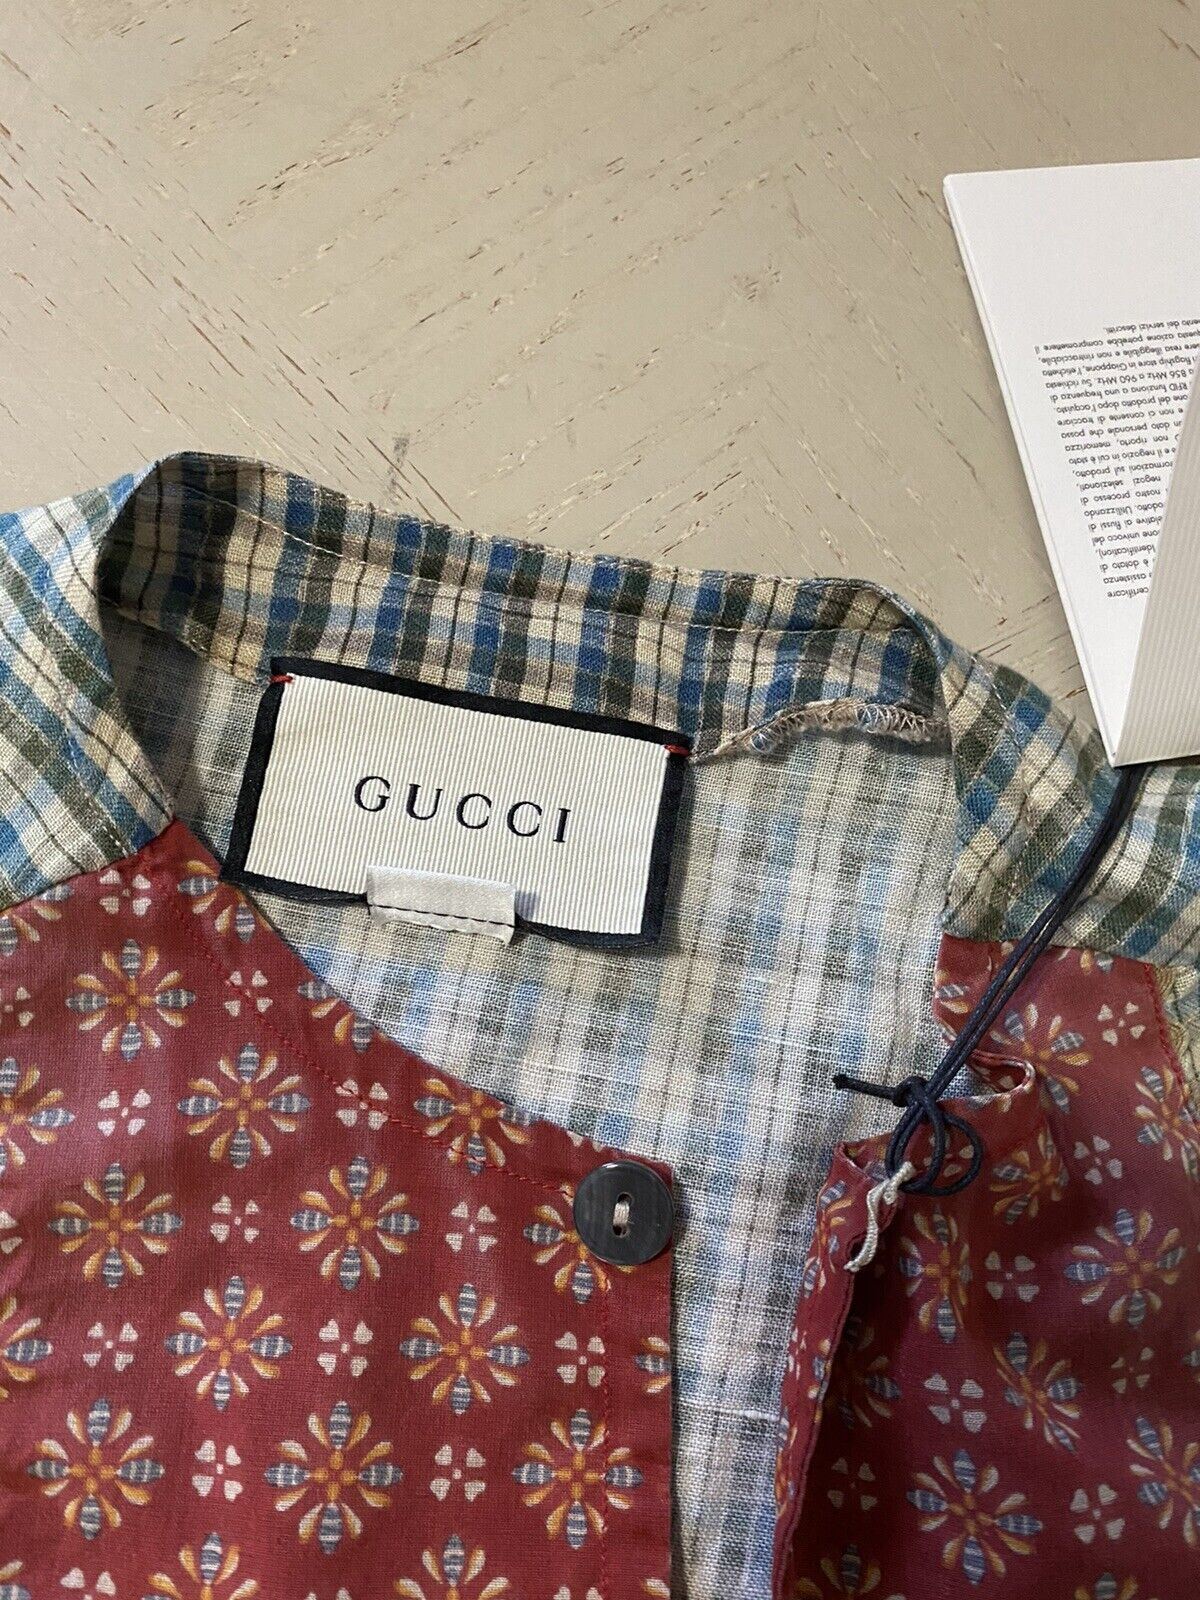 New $1100 Gucci Country Check Shirt Blue/Red/Green Size L Italy